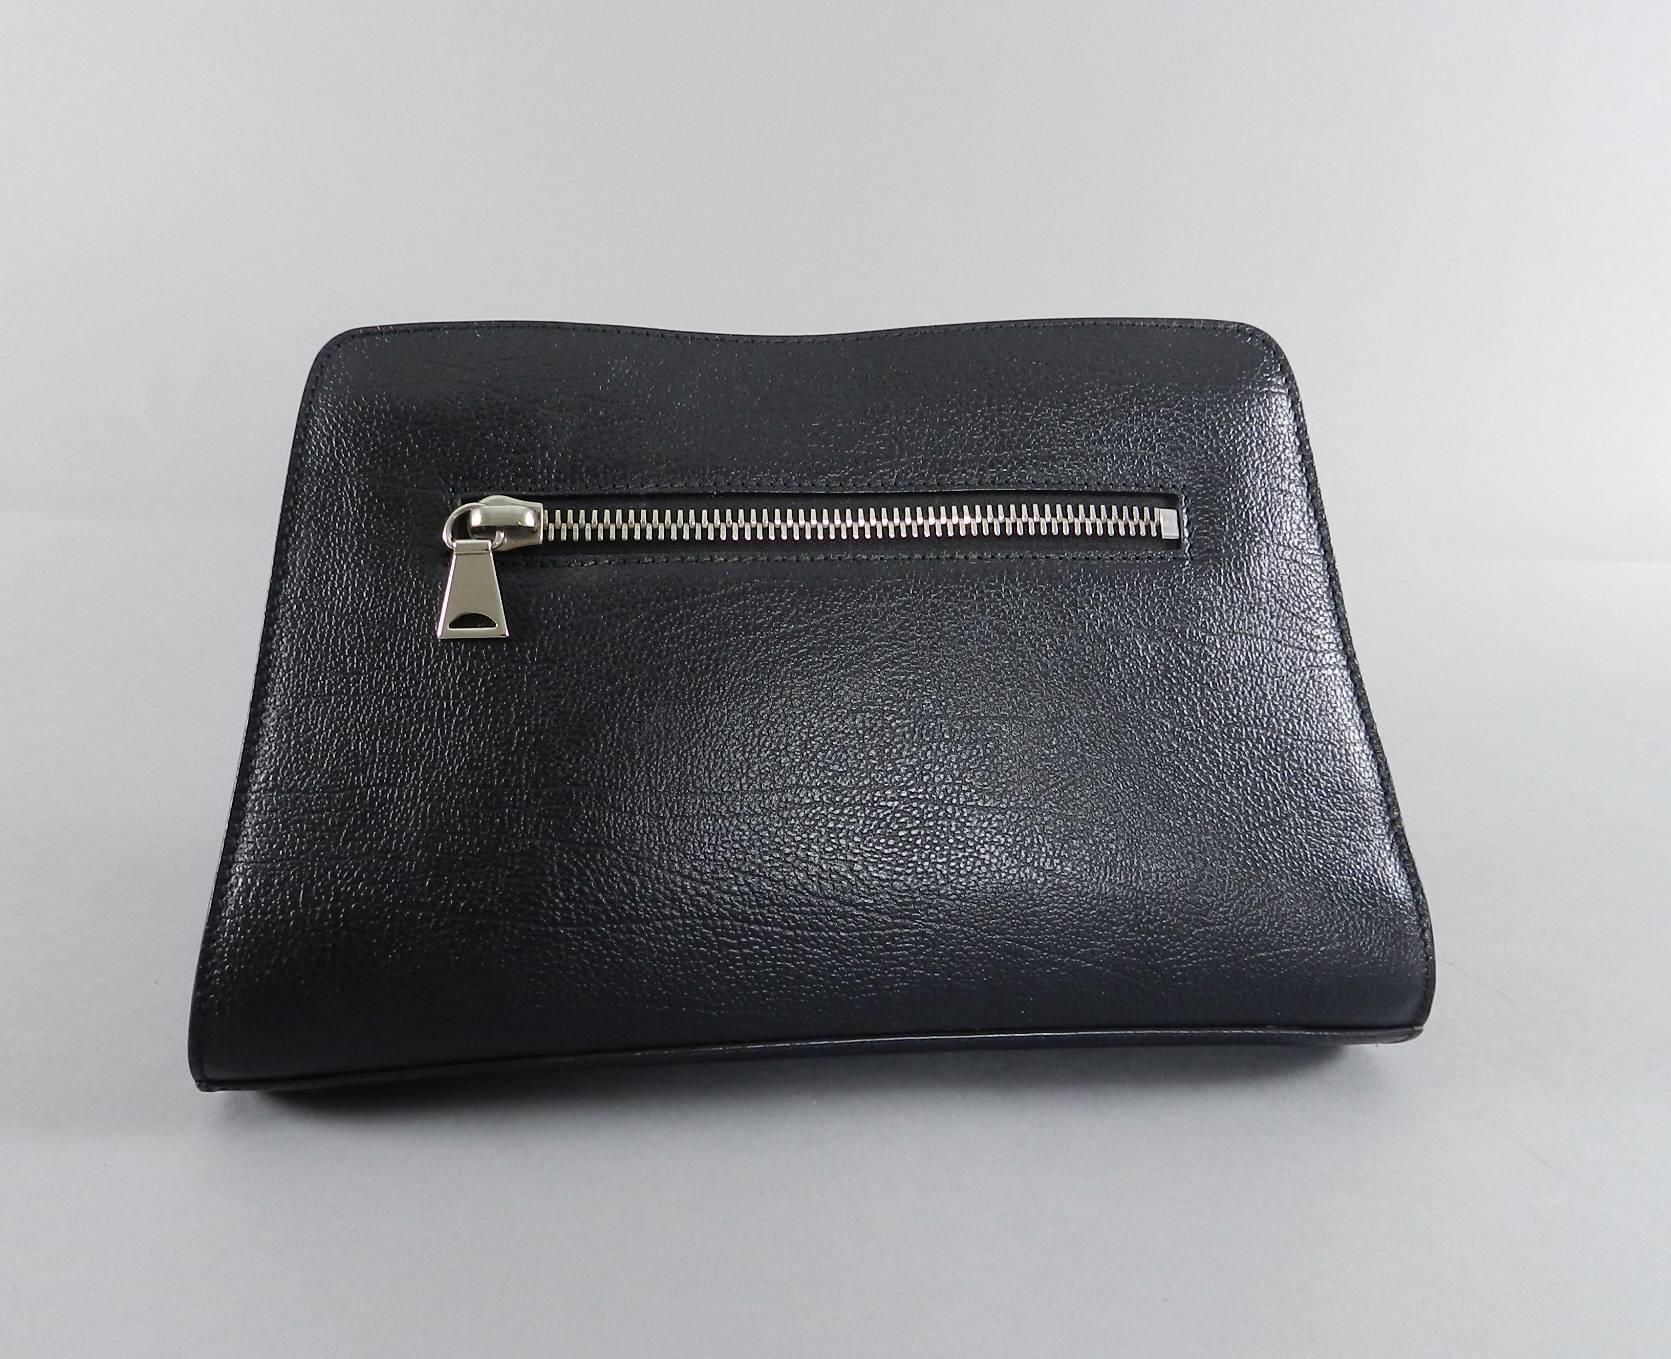 Proenza Schouler Black Clutch Bag with Silver Zipper.   Interior is lined with natural colored linen fabric. Excellent pre-owned clean condition.  Measures 11.75 x 7.5 x 2.75".

We ship worldwide.